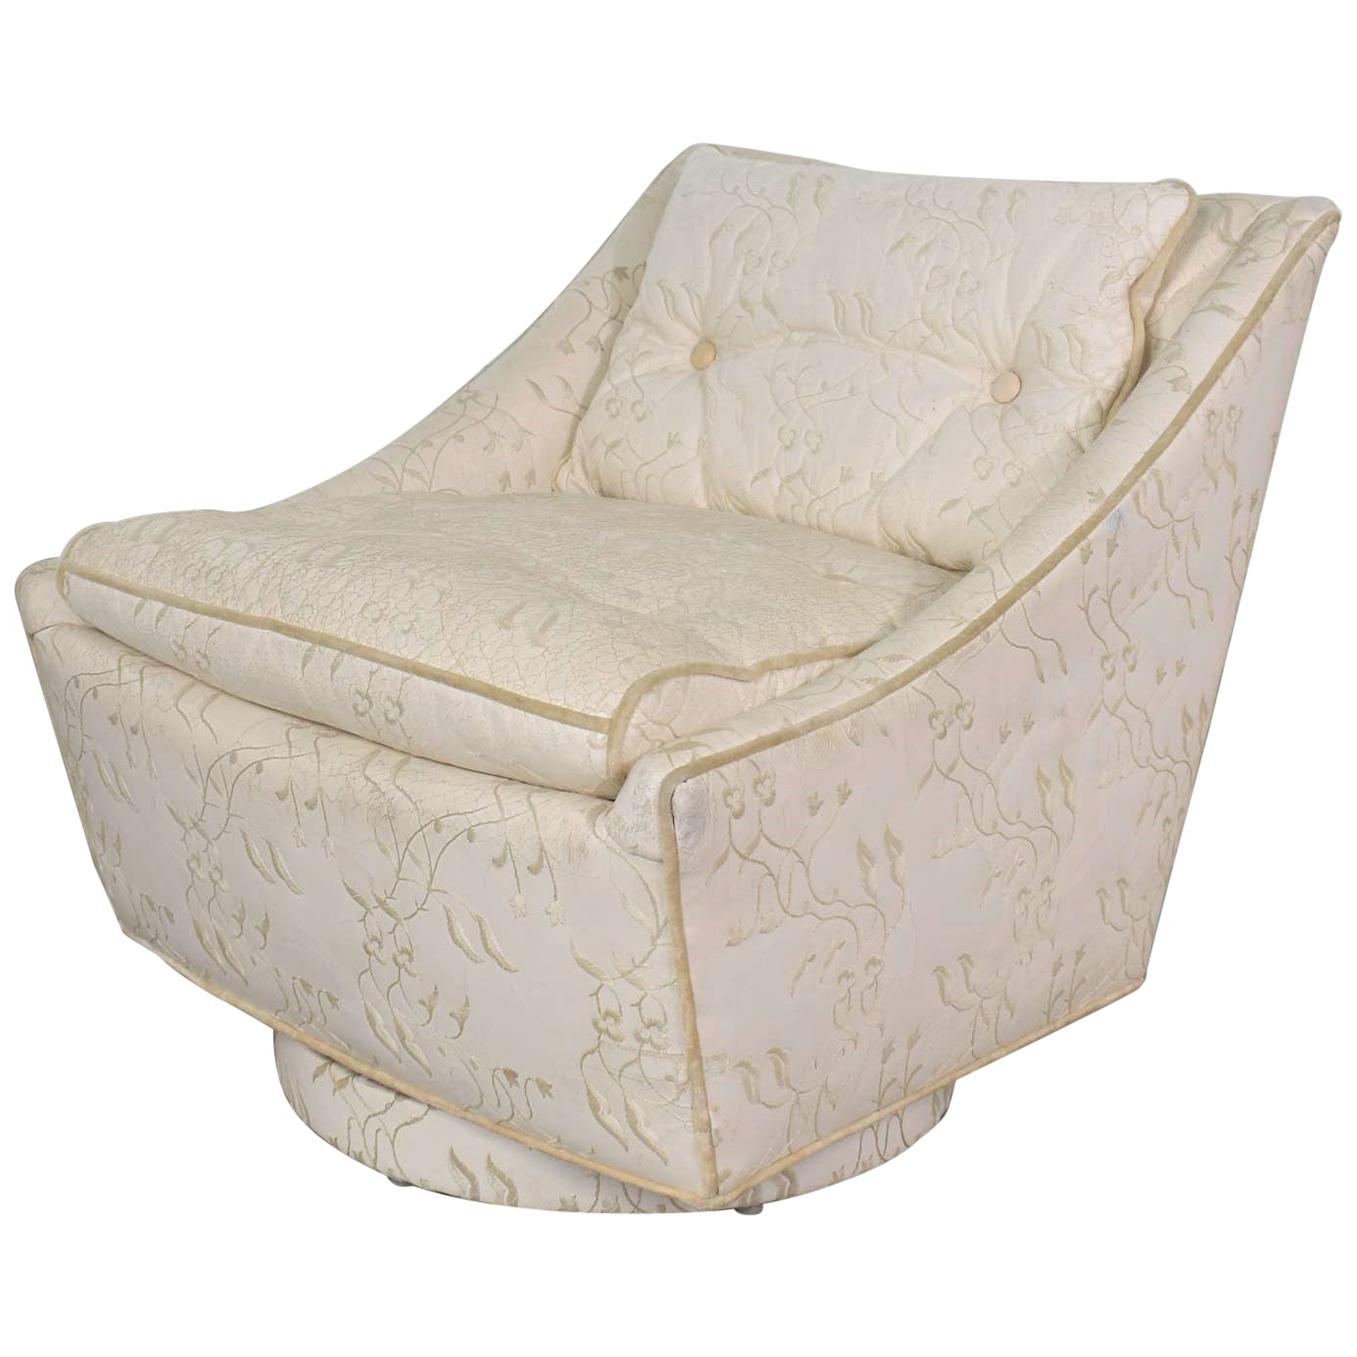 Vintage Art Deco Petite White Swivel Chair Embroidered Leather by Oxford Ltd.